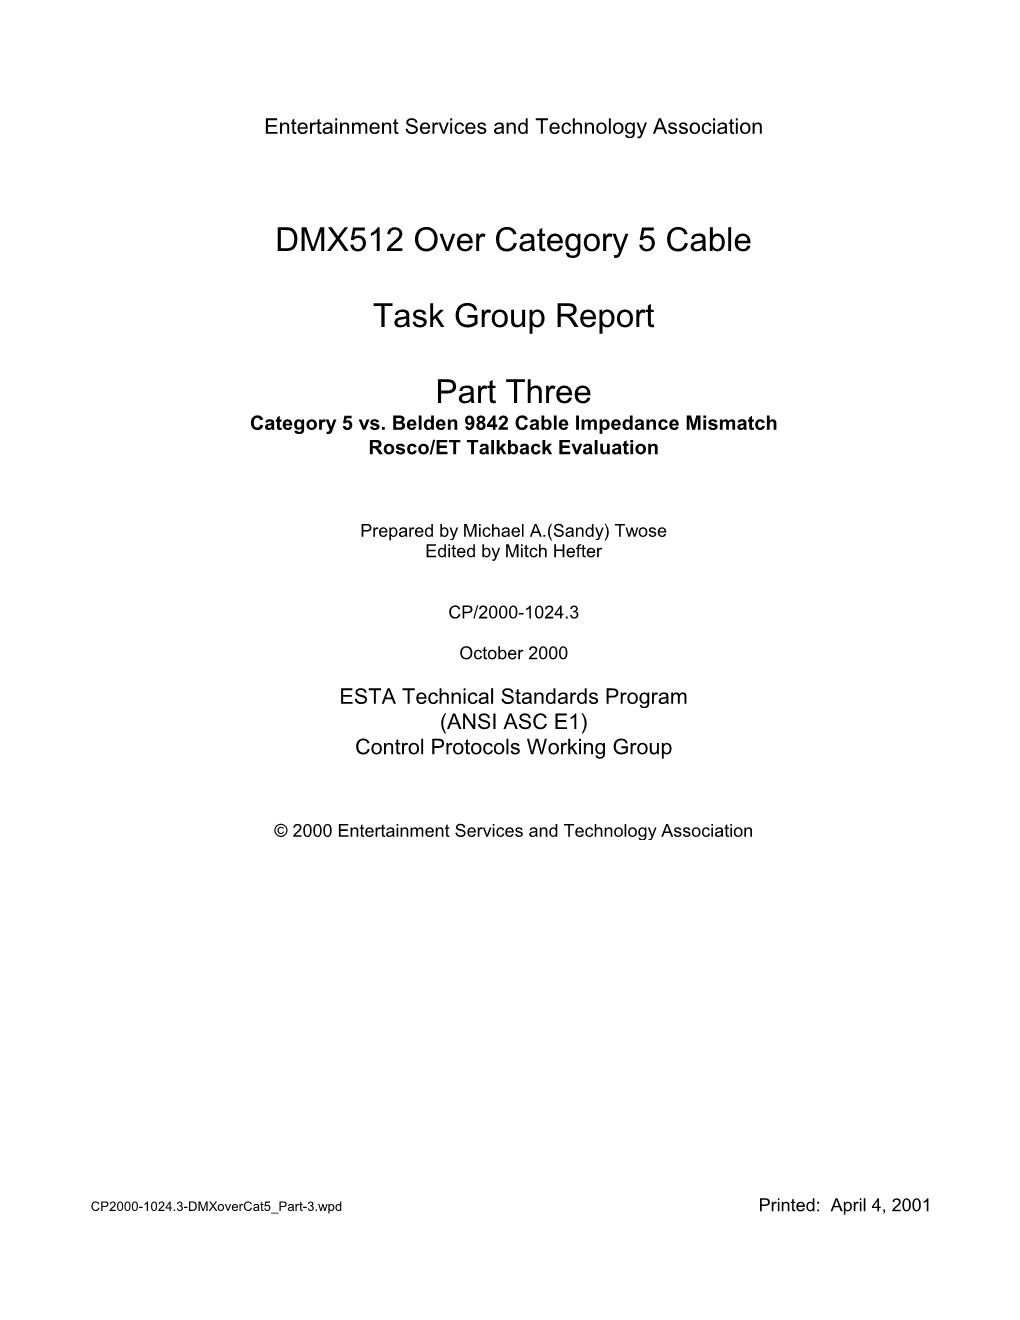 DMX512 Over Category 5 Cable Task Group Report Part Three